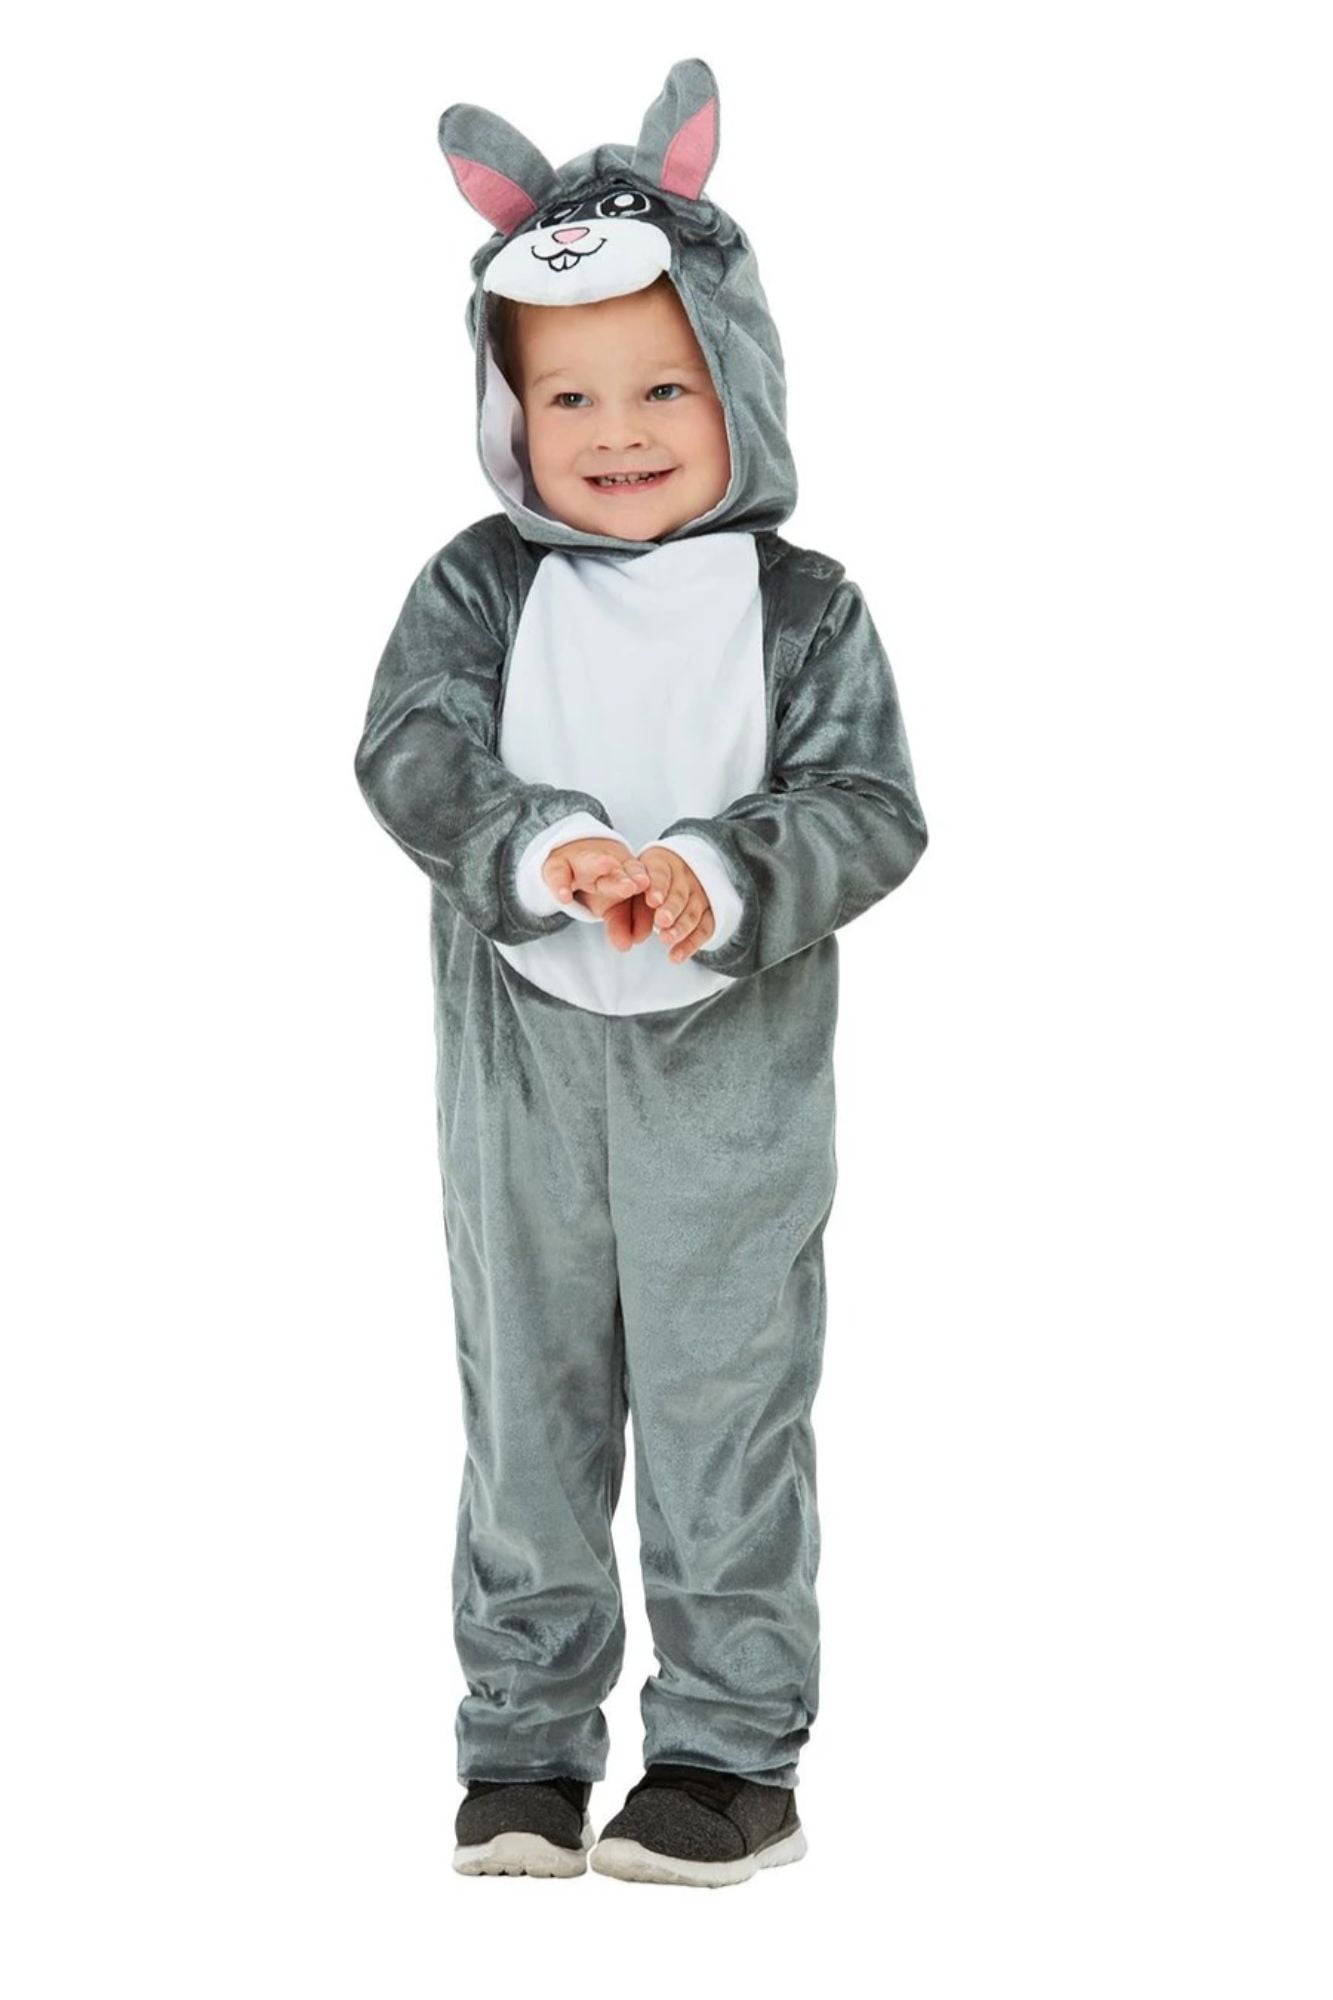 KIDS MOUSE COSTUME MEDIUM SIZE ANIMAL FANCY DRESS FULL OUTFIT JUMPSUIT WITH HOOD